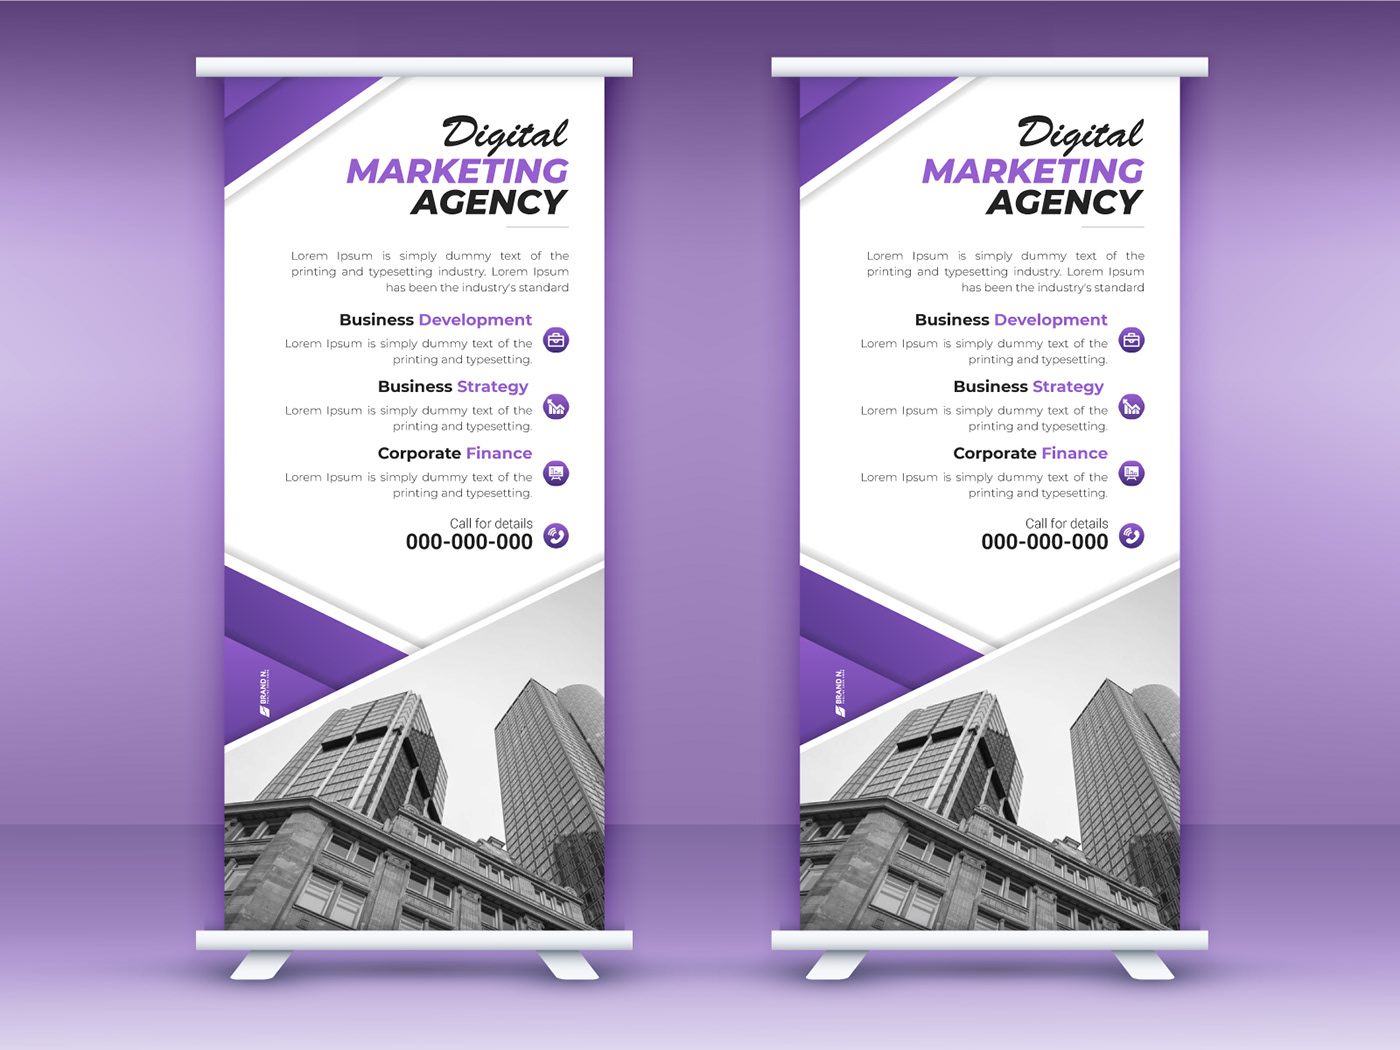 digital marketing   agency roll up banner design brand identity Advertising  Pull up banner Signage Standee